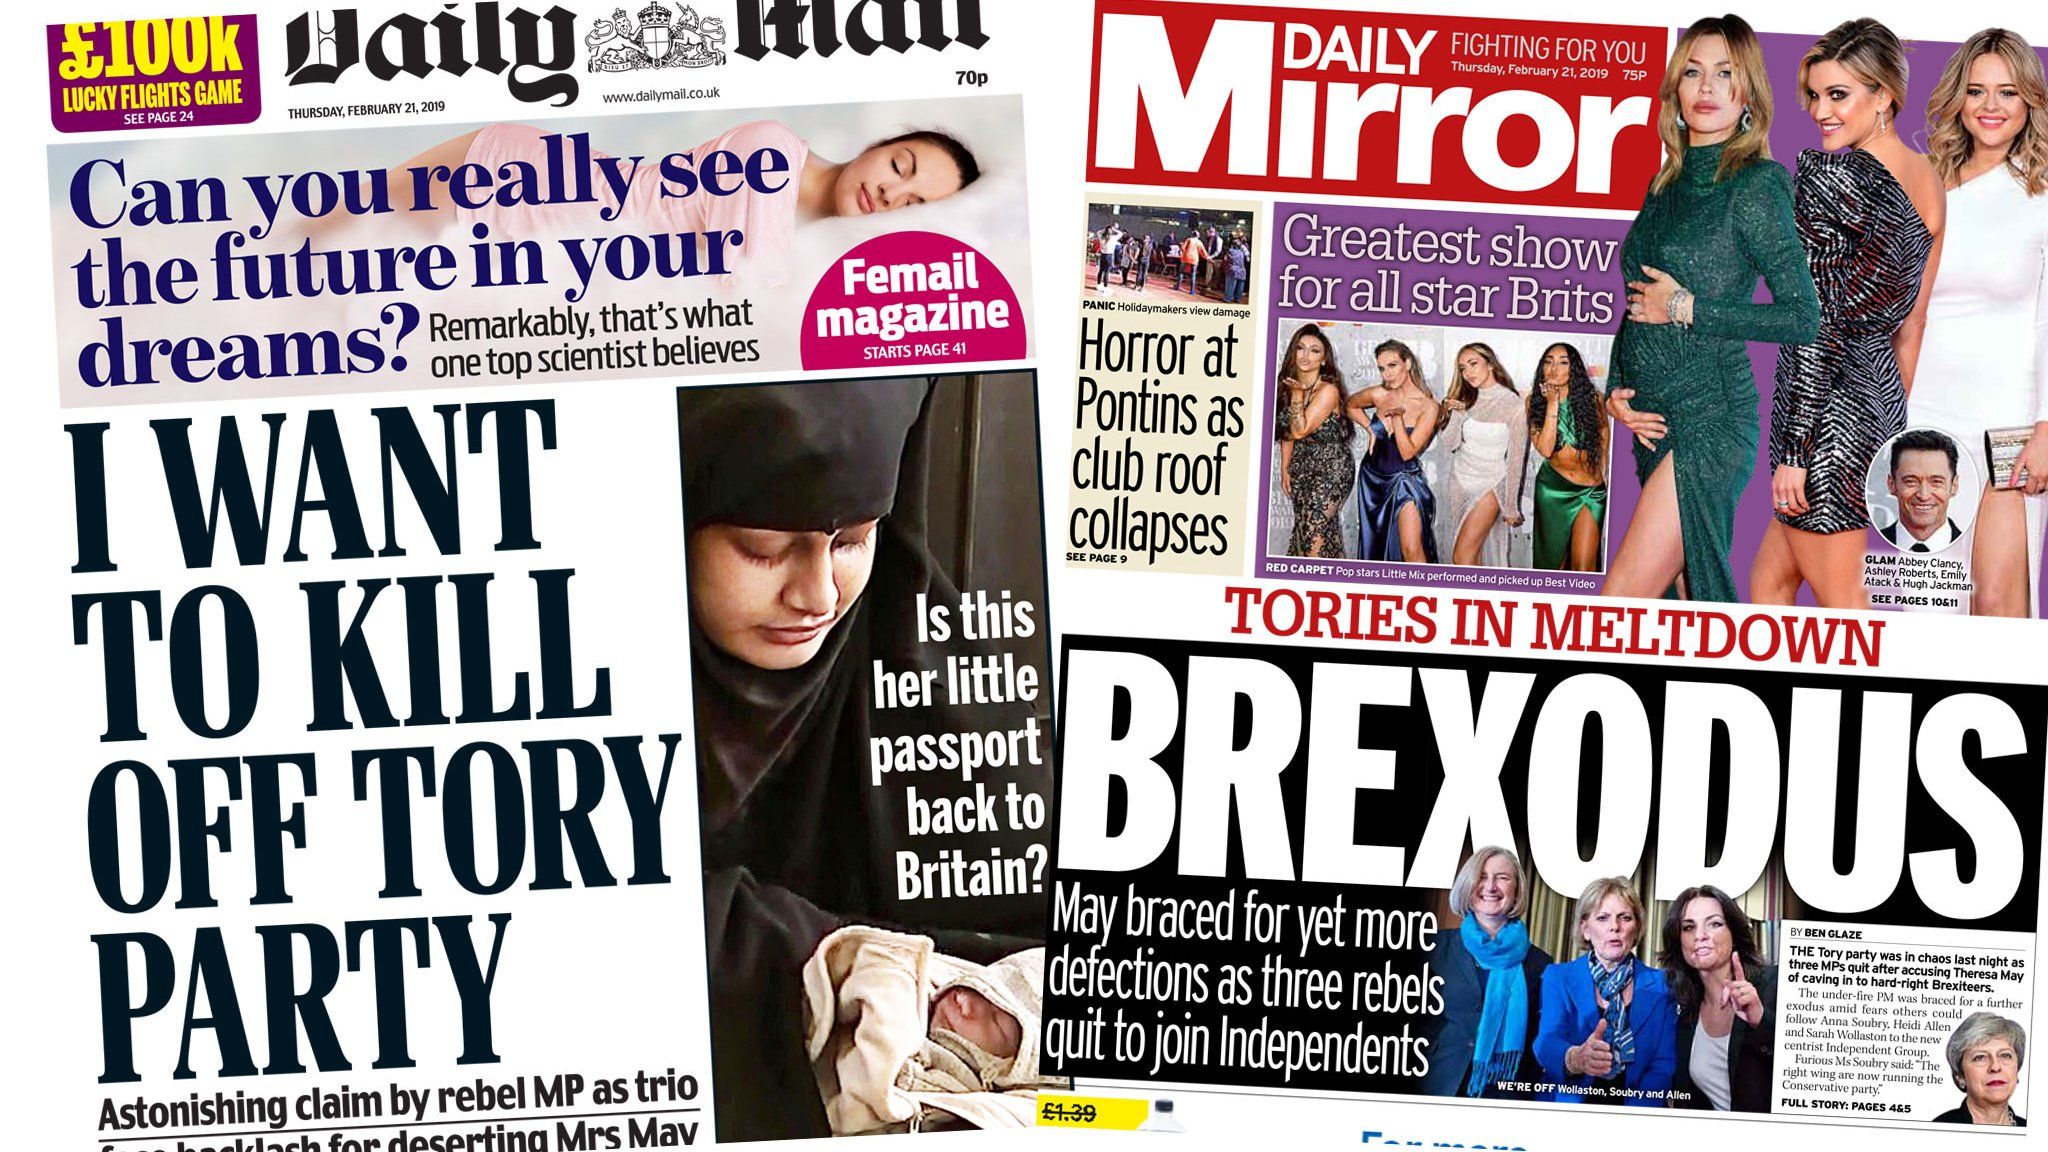 Daily Mail and Mirror front pages